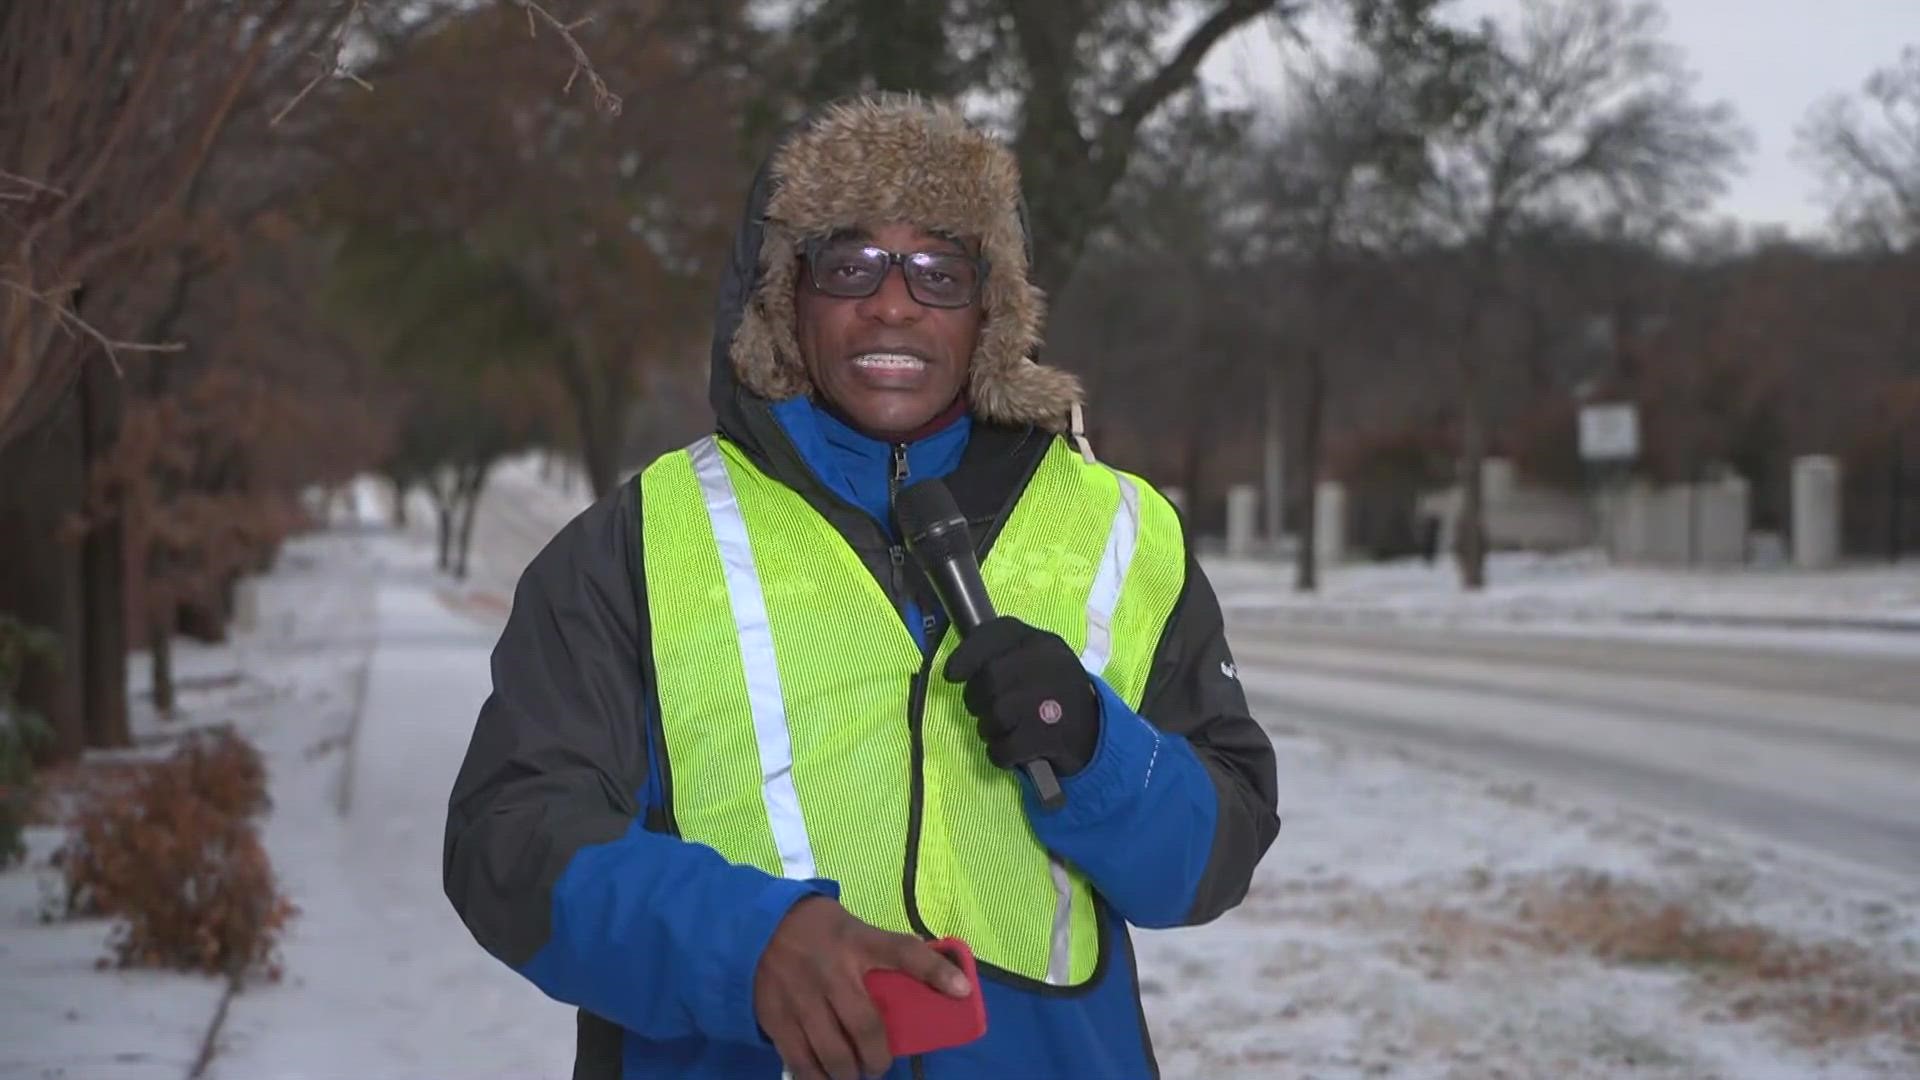 Temperatures aren't expected to rise above freezing until Thursday. WFAA's Scoop Jefferson provides a live update from Denton County.